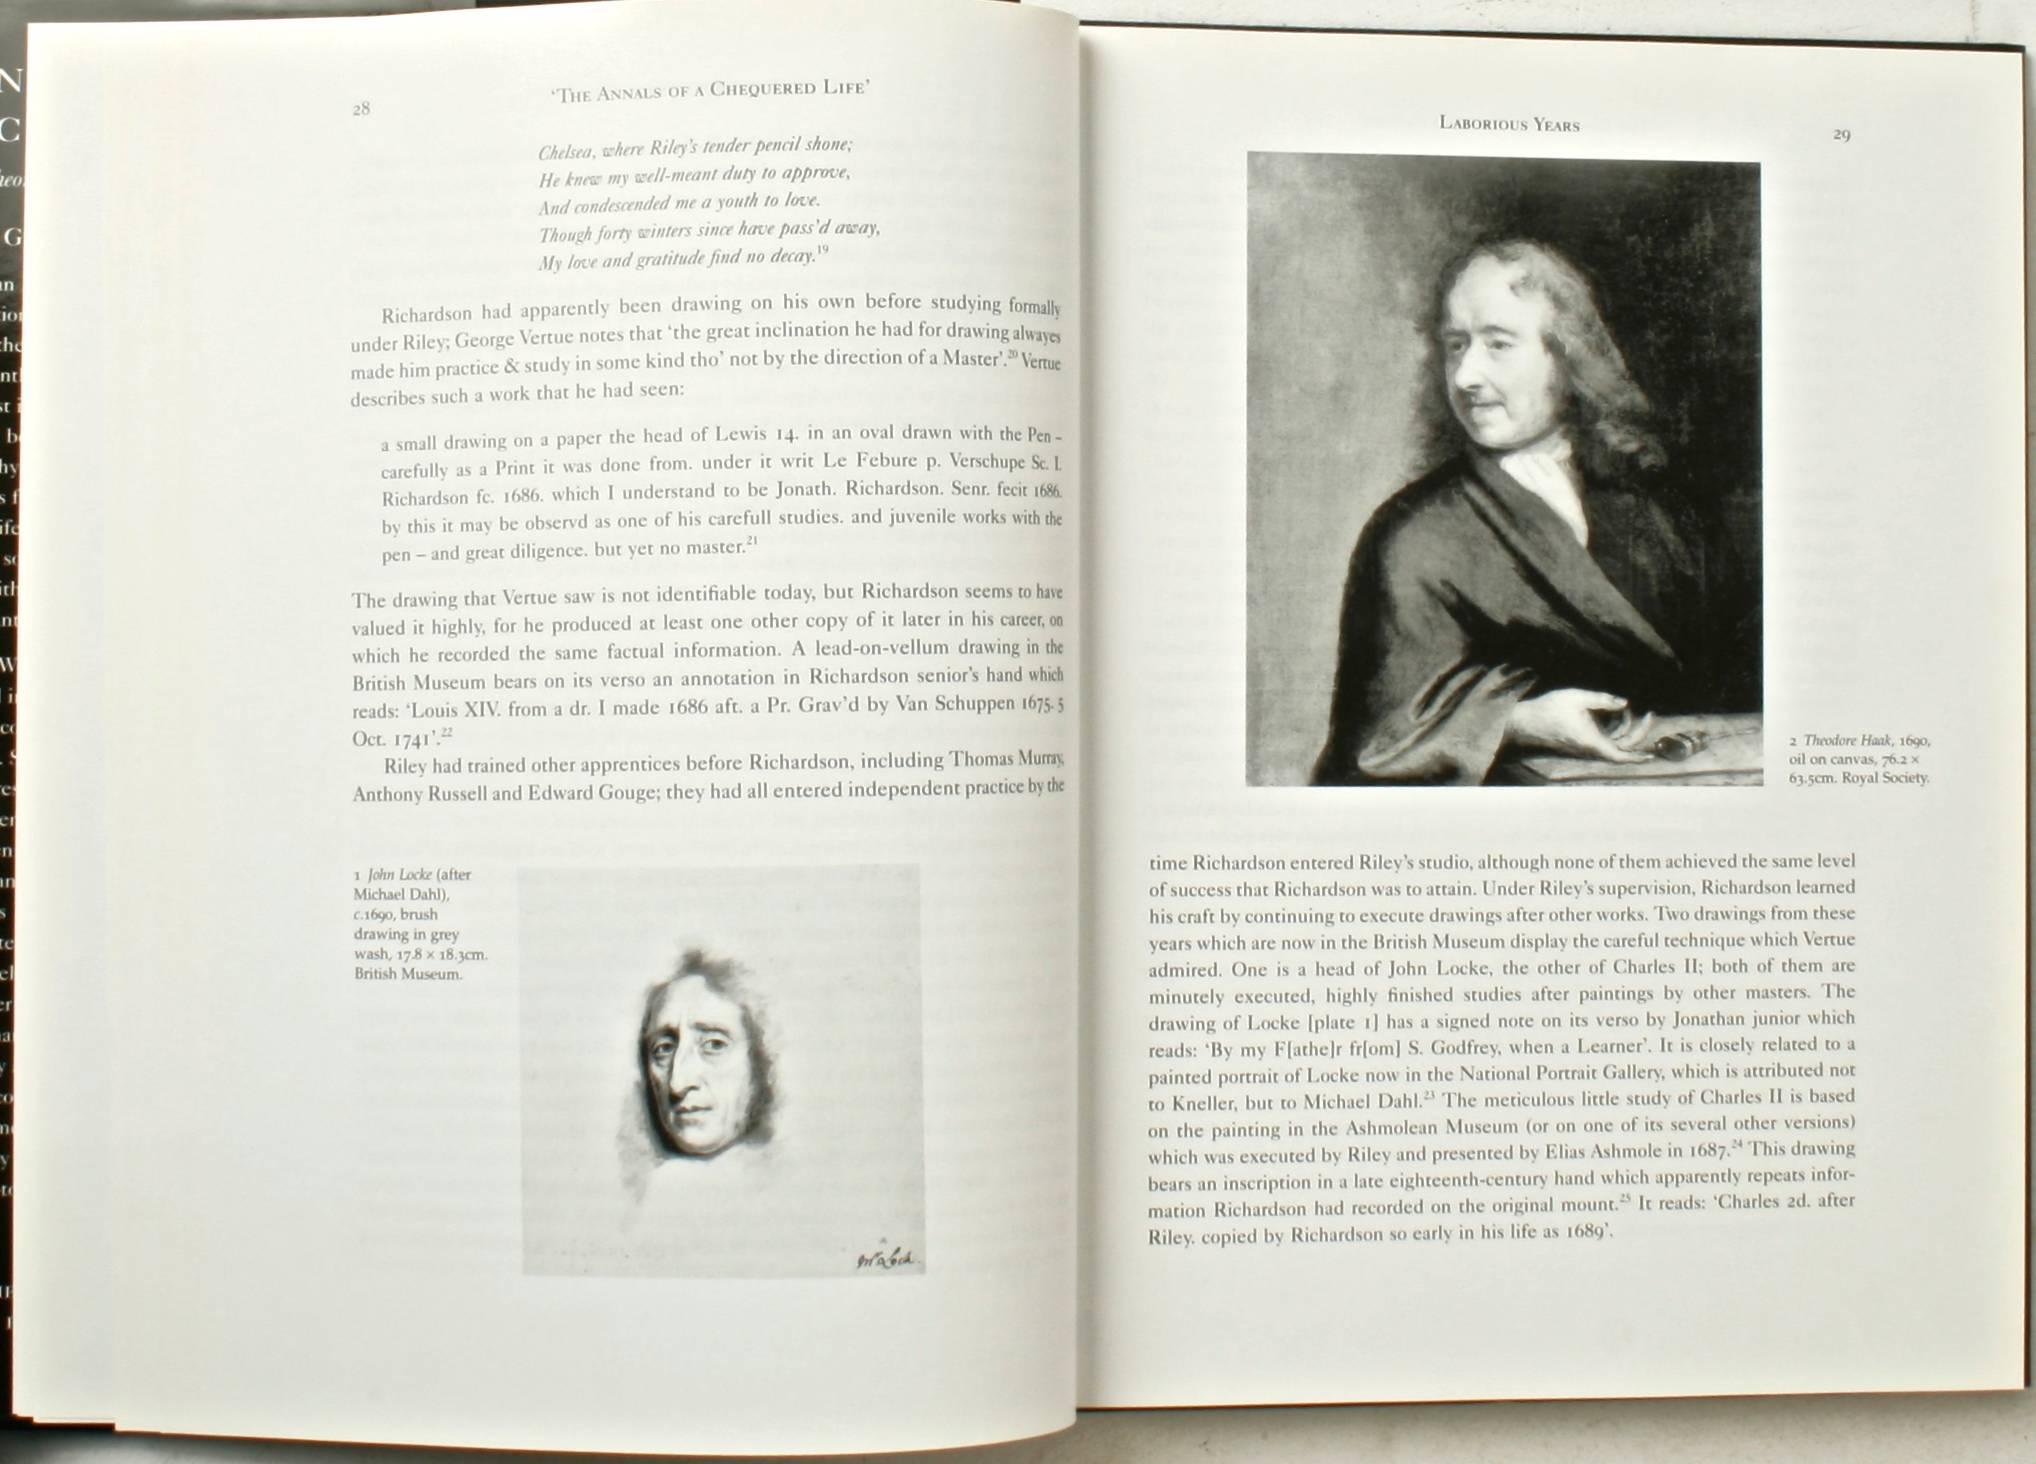 Jonathan Richardson: Art Theorist of the English Enlightenment (The Paul Mellon Centre for Studies in British Art) by Carol Gibson-Wood. Yale University Press, New Haven, Connecticut / London, 2000. Pre-publication 1st Ed hardcover with dust jacket.